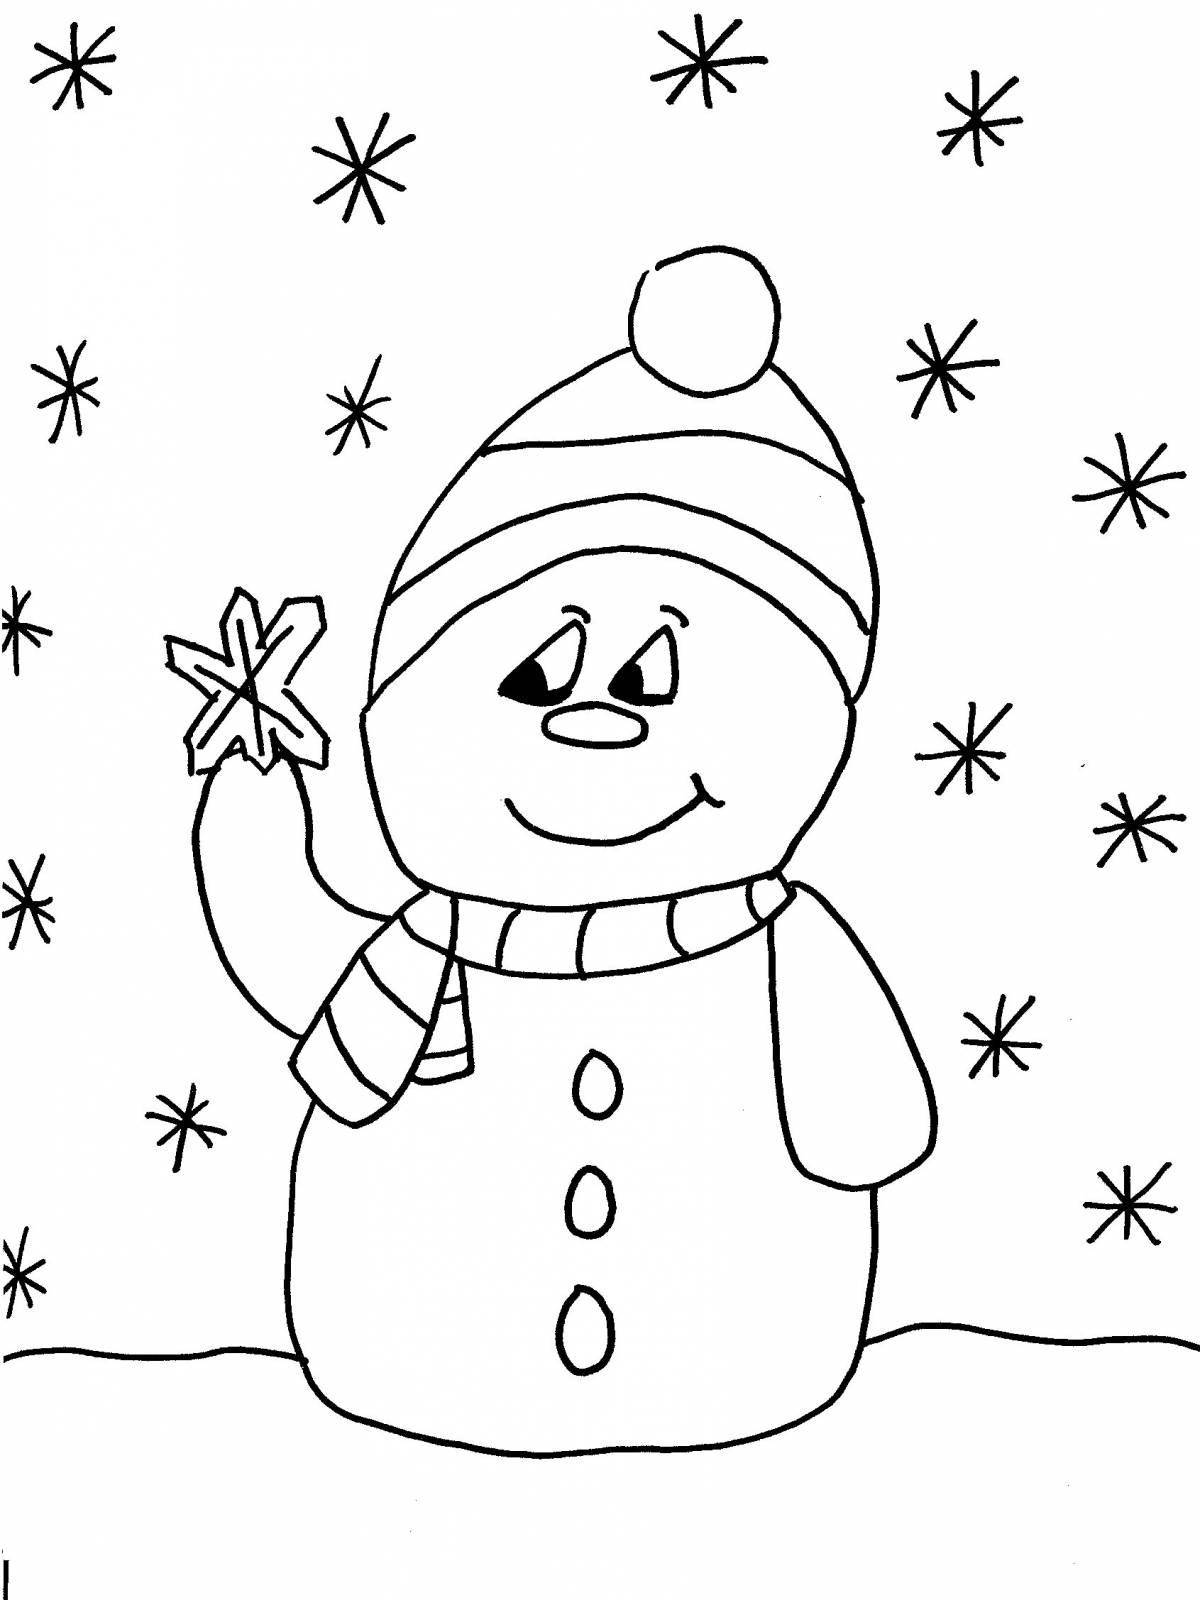 Wonderful winter coloring for kids